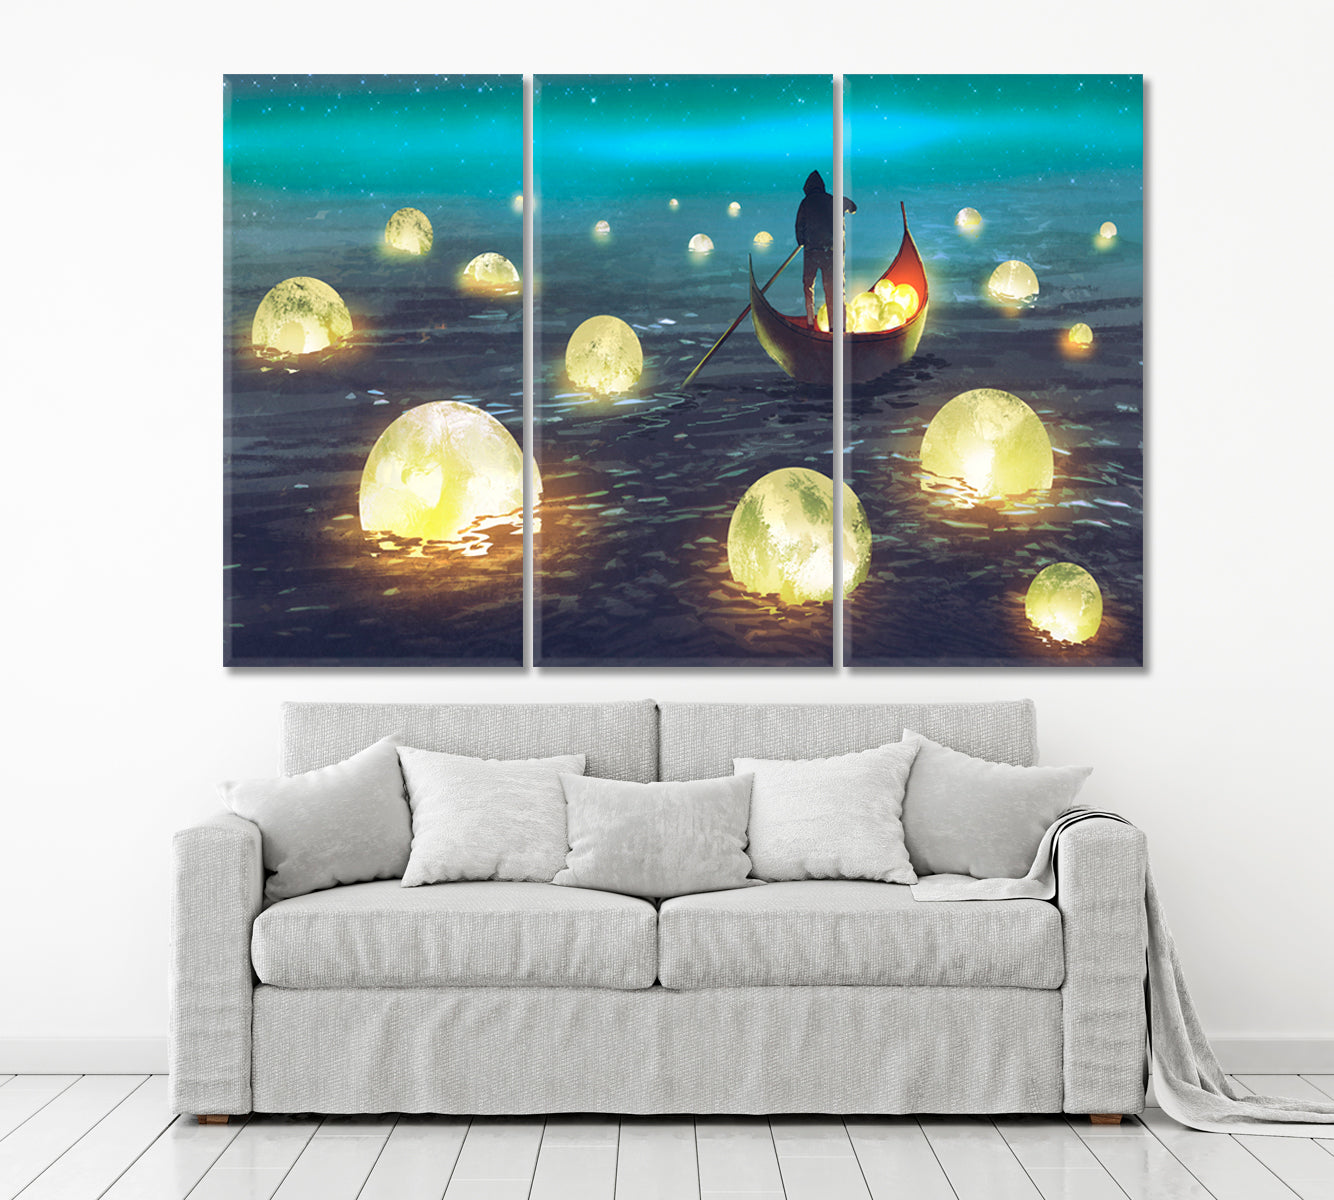 SURREAL Night Scenery Man Rowing Boat Glowing Moons Floating Sea Surreal Fantasy Large Art Print Décor Artesty   